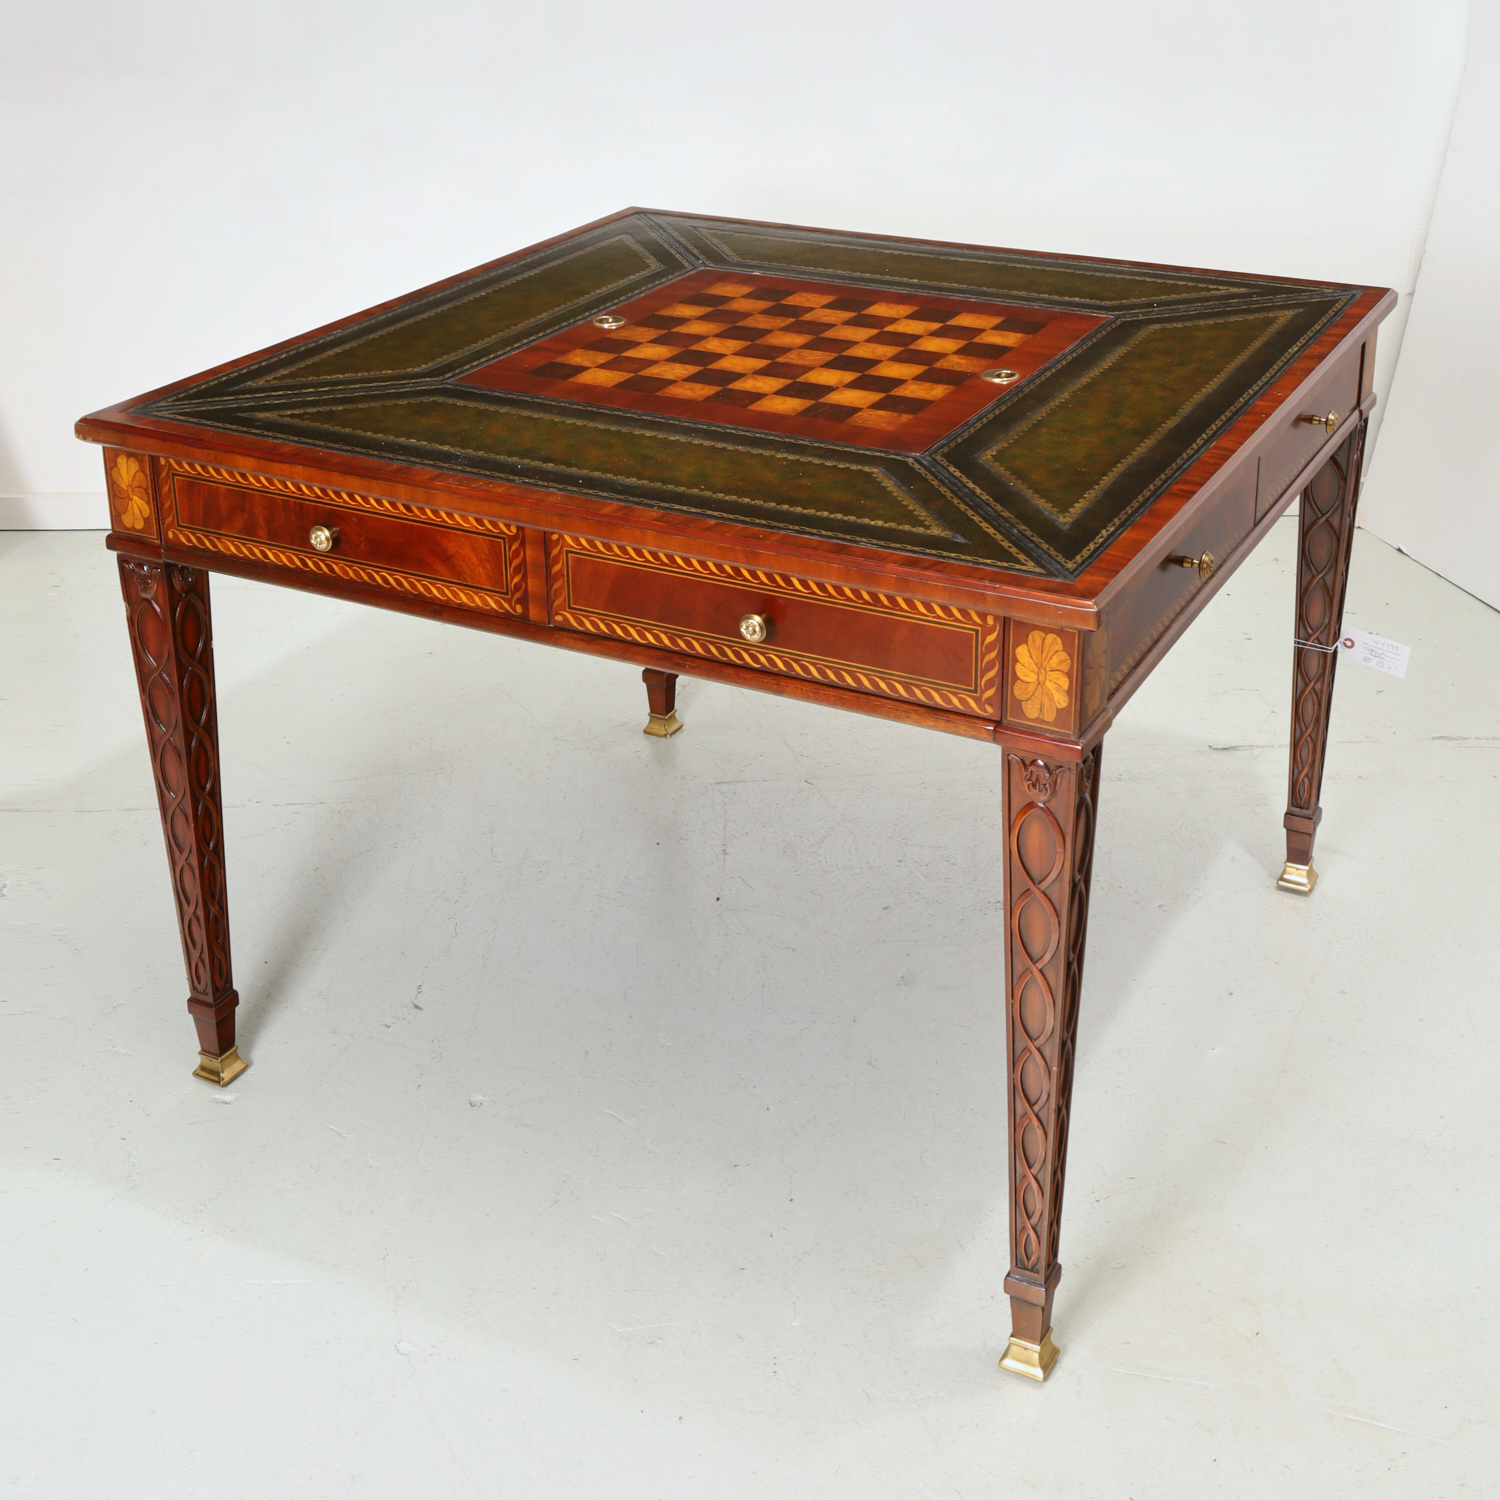 MAITLAND-SMITH MARQUETRY INLAID